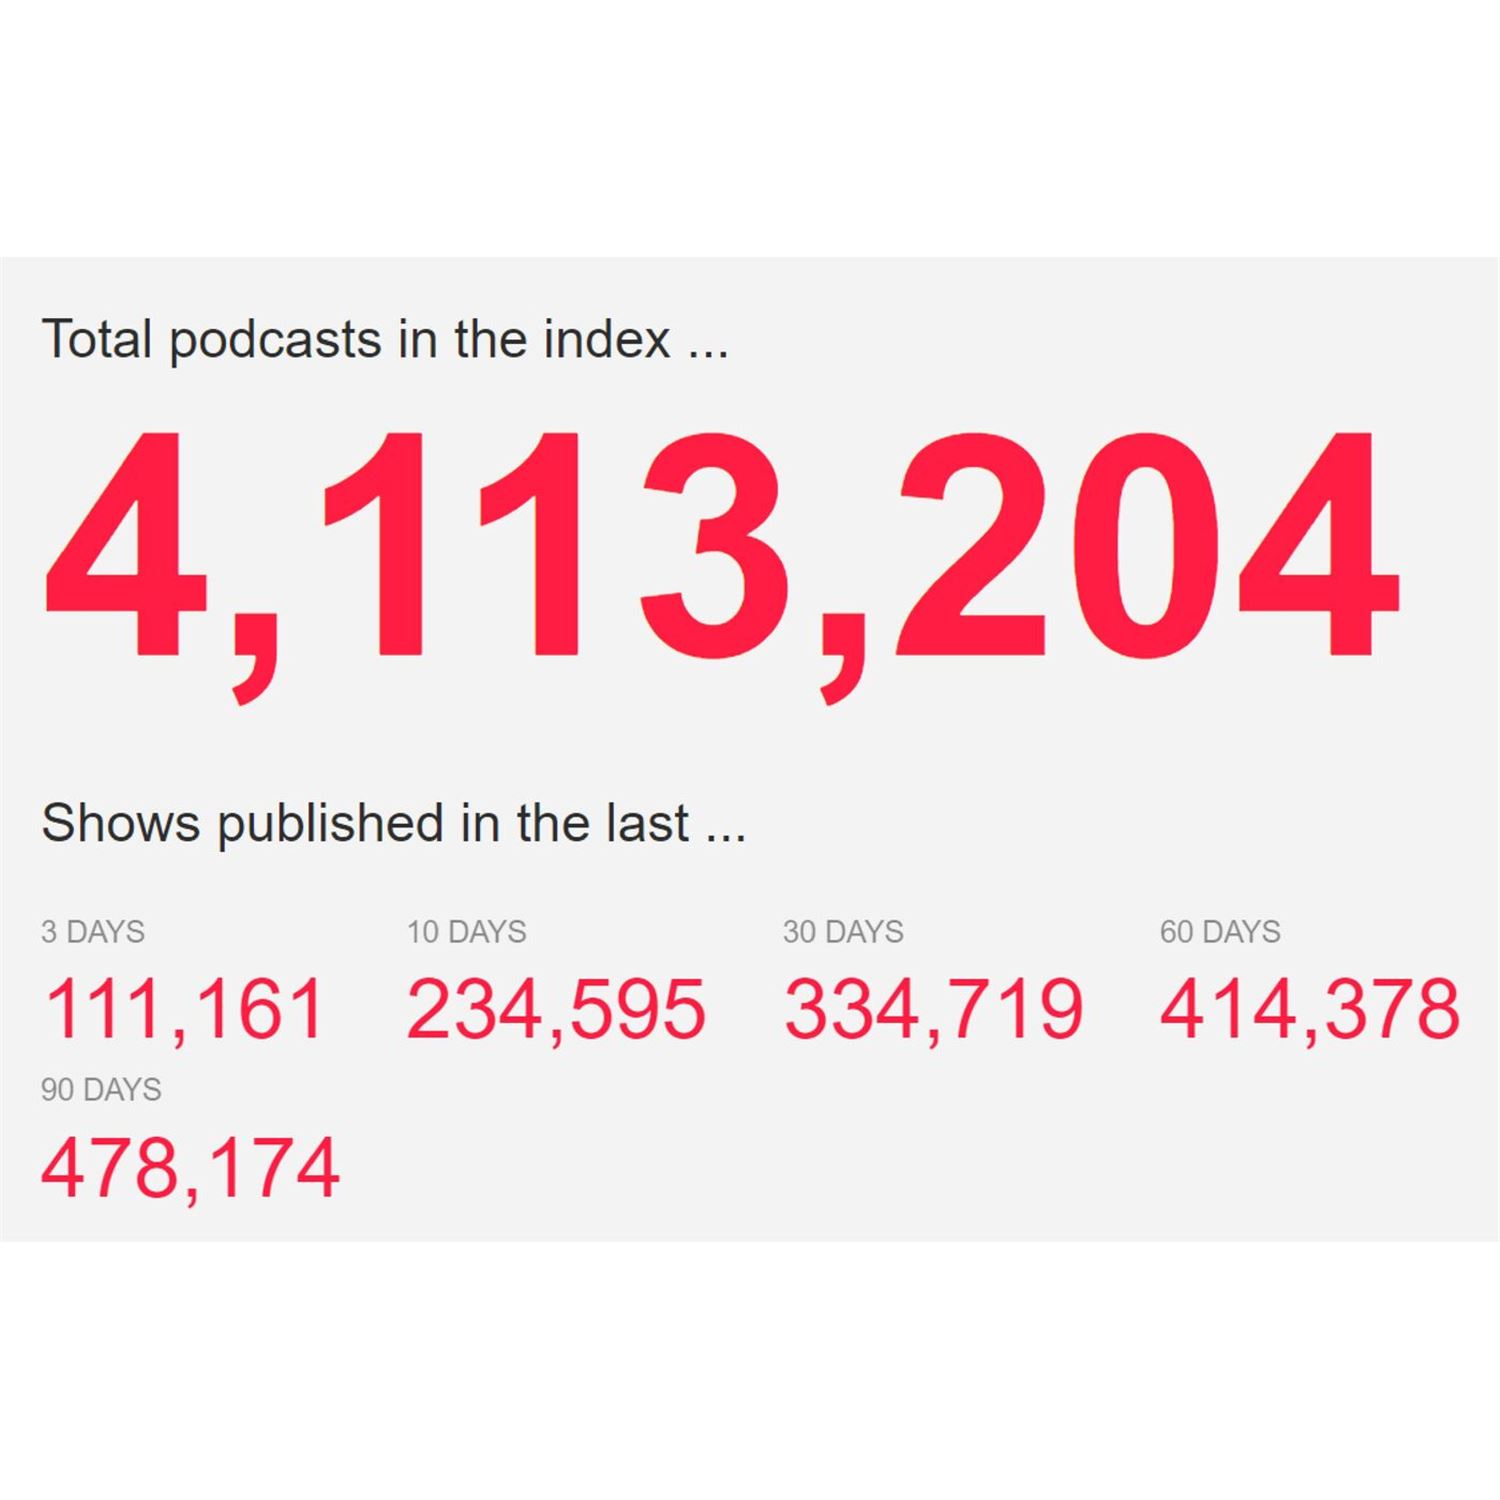 Podcasting industry stats